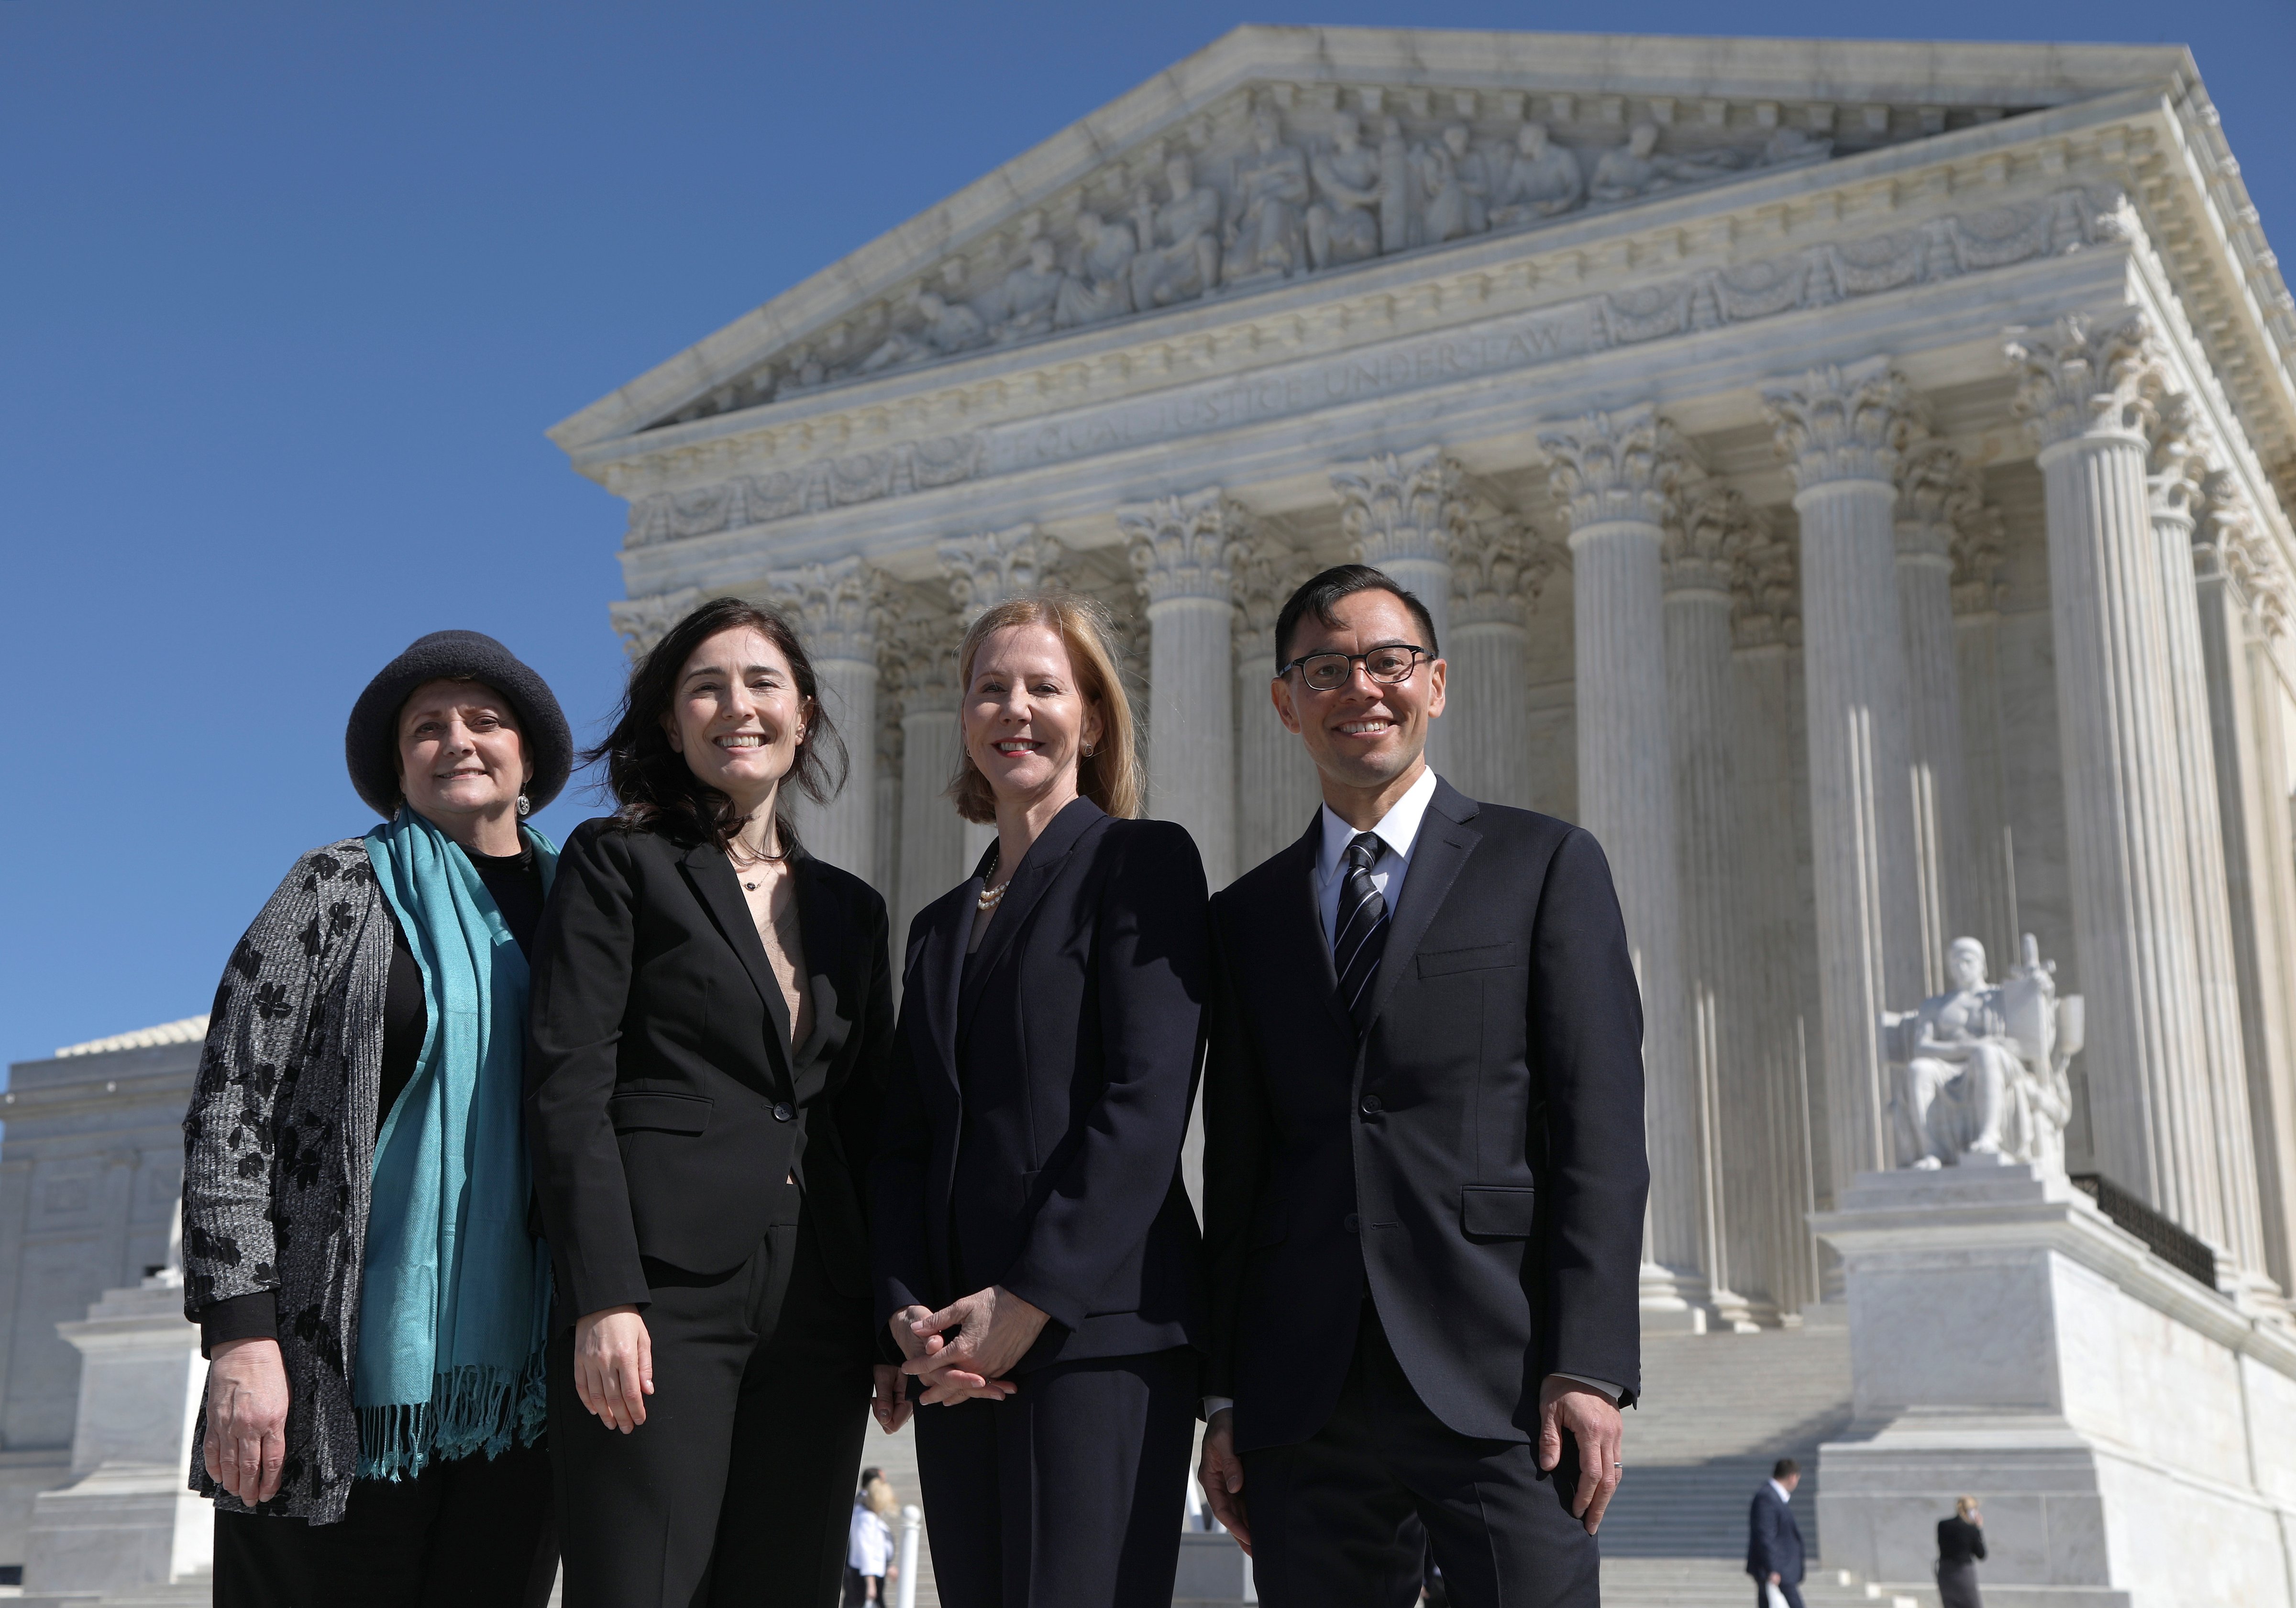 Kathaleen Pittman, of Hope Medical Group for Women, Rikelman, senior director of the Center for Reproductive Rights, Nancy Northup, center president, and T.J. Tu, the center's senior council for U.S. litigation, stand outside the U.S. Supreme Court after oral arguments in June Medical Services v. Russo on March 4. (Alyssa Schukar—Center for Reproductive Rights/AP)